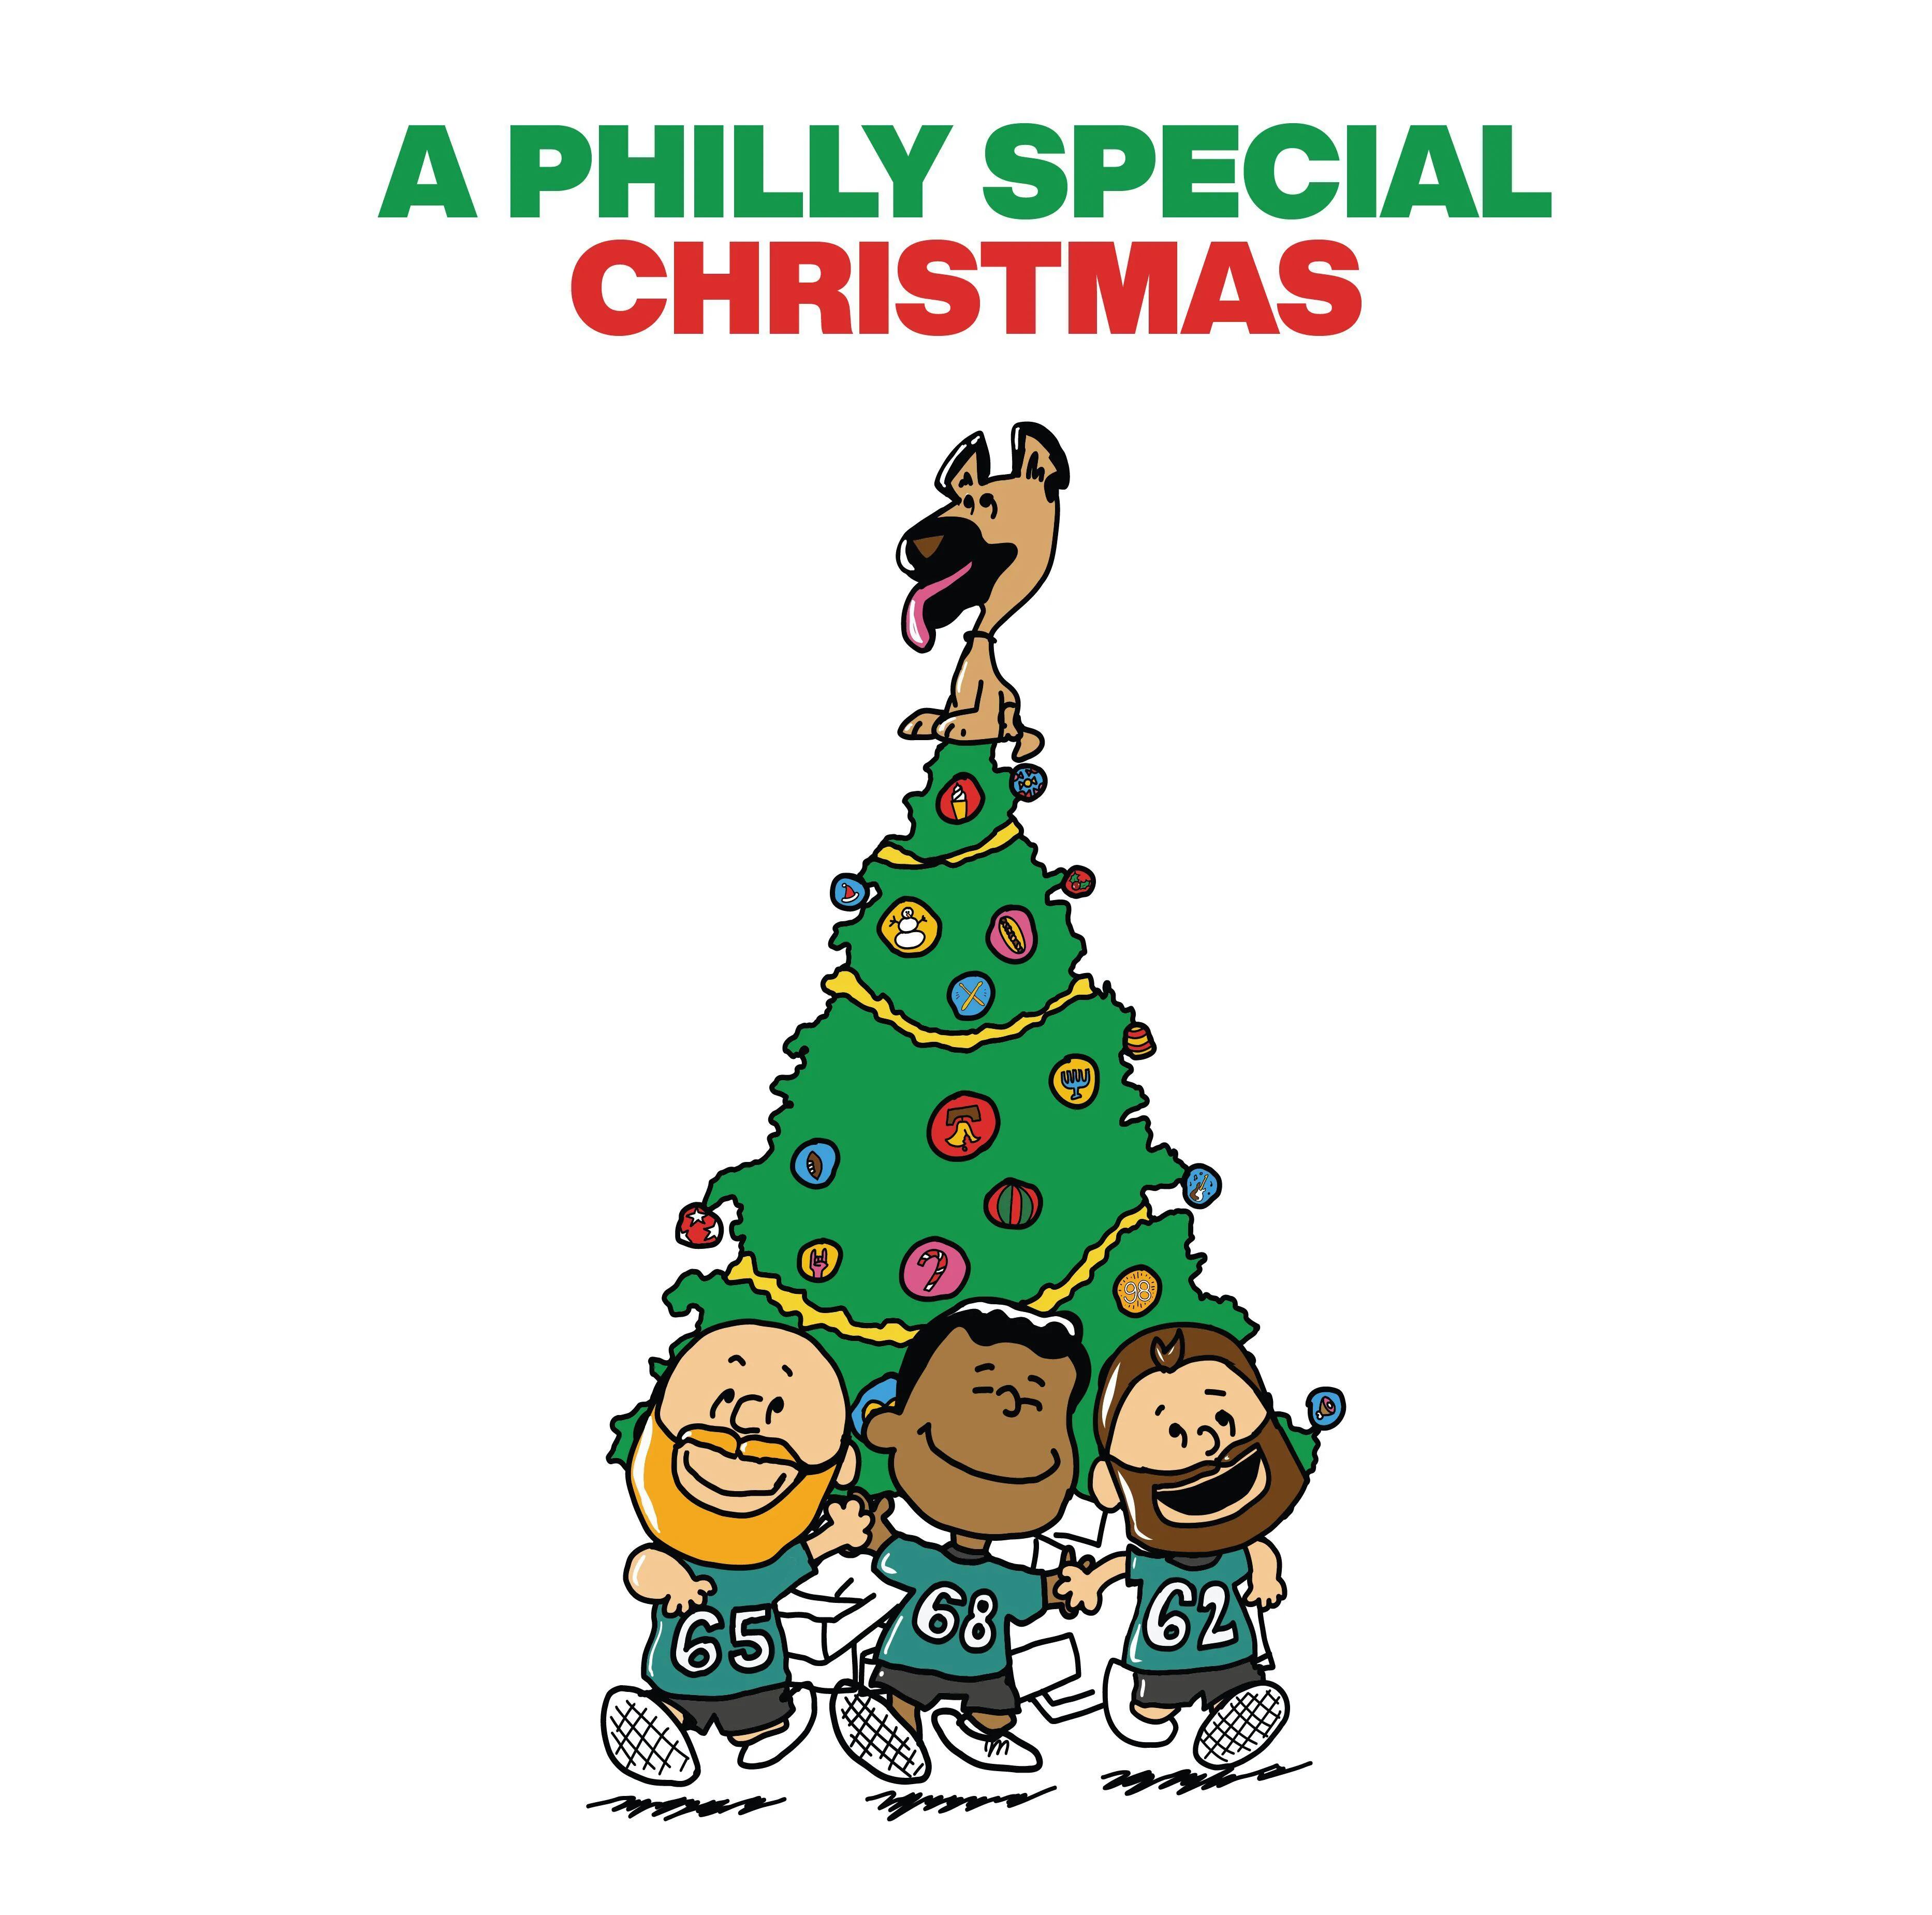 Jason Kelce, Eagles announce 'A Philly Special Christmas' album